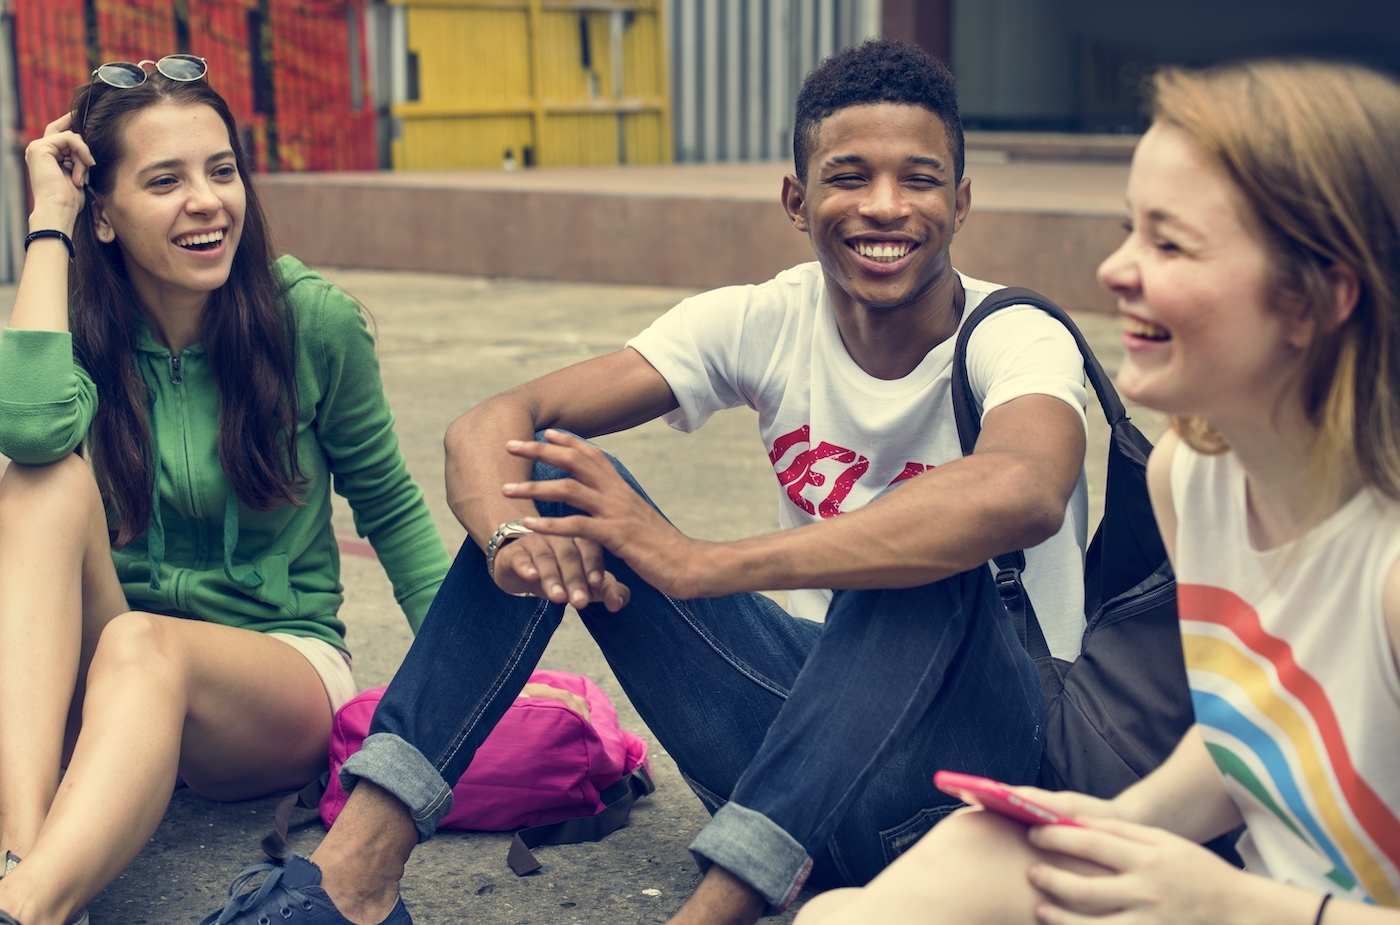 Vertical explainer photo 4 - Three teenagers sitting and talking while smiling